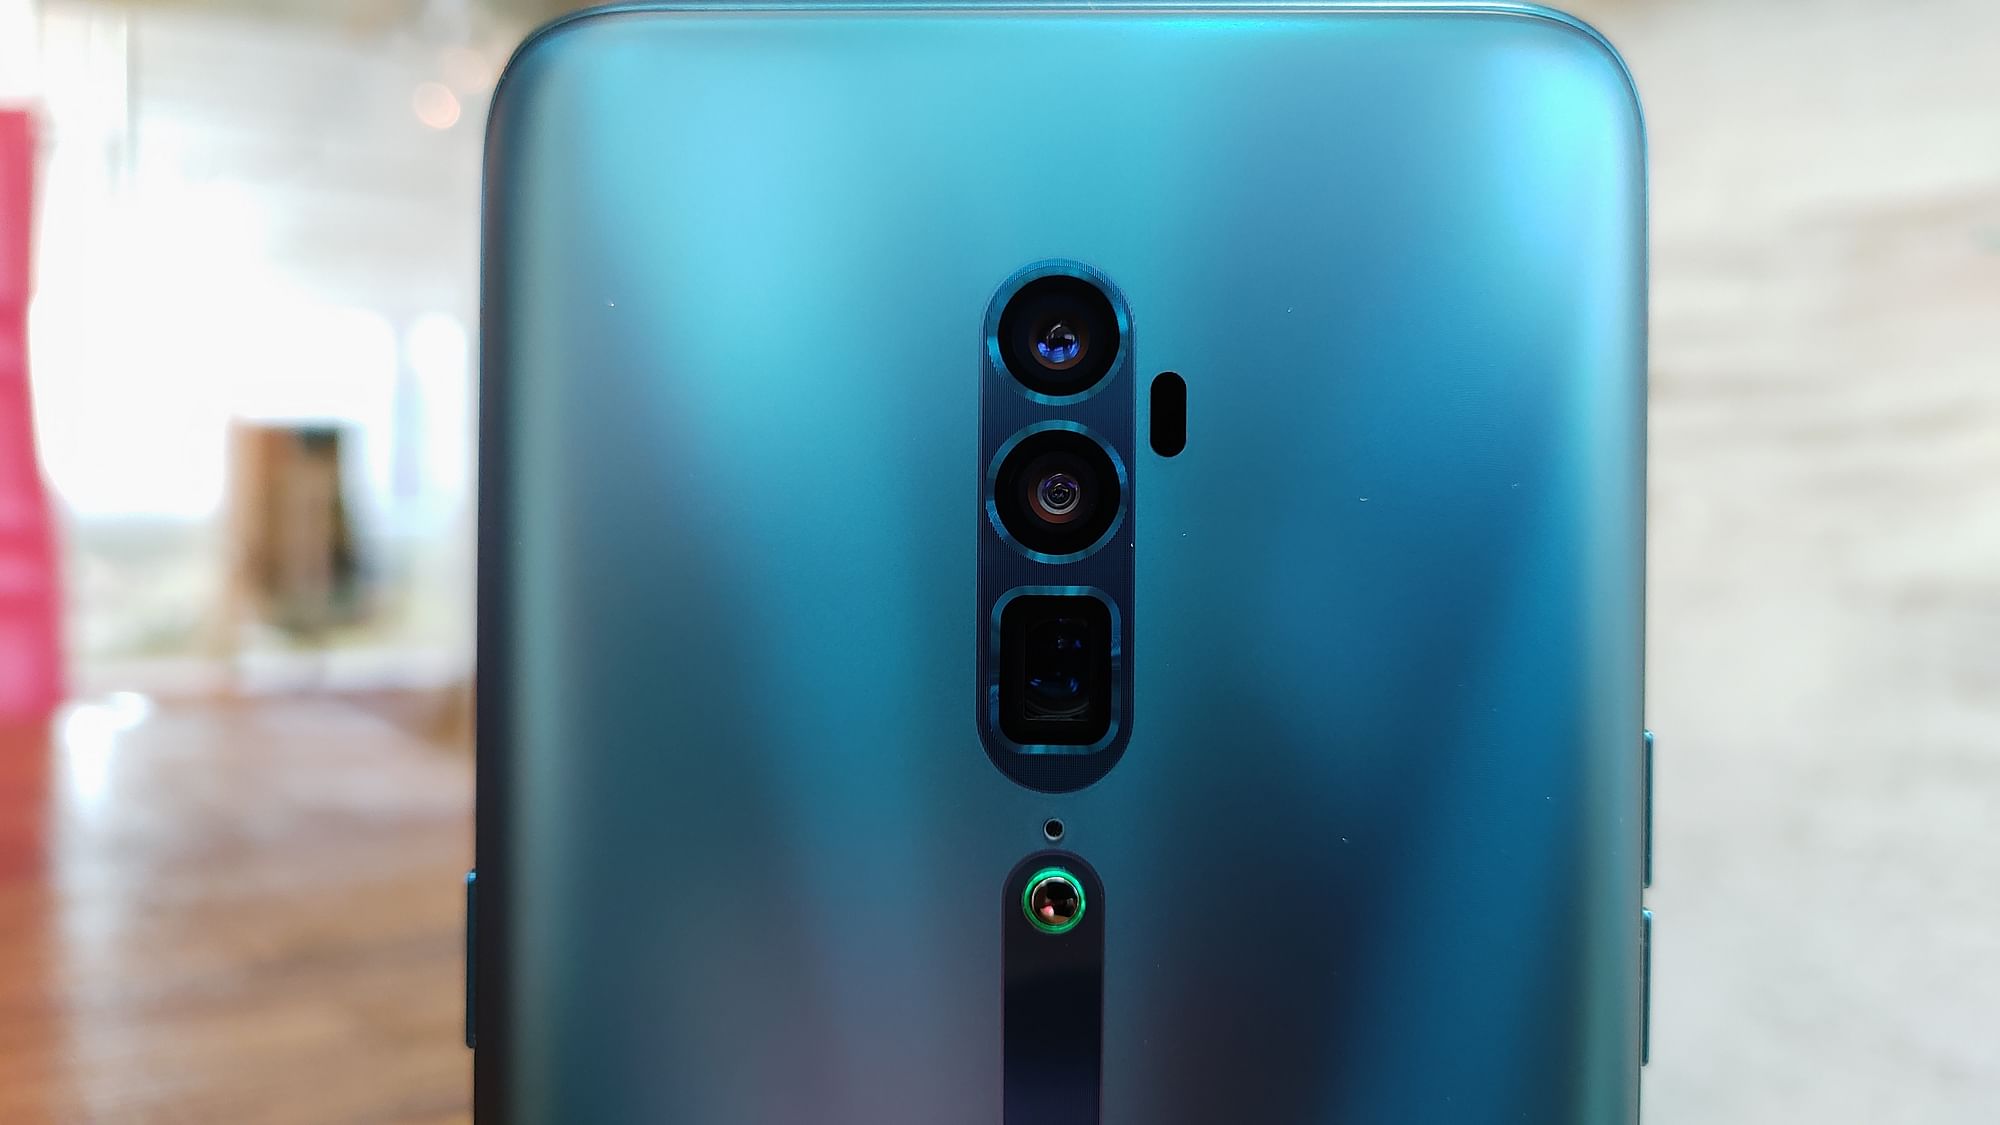 The Oppo Reno 10x Zoom comes with hybrid 10x optical zoom.